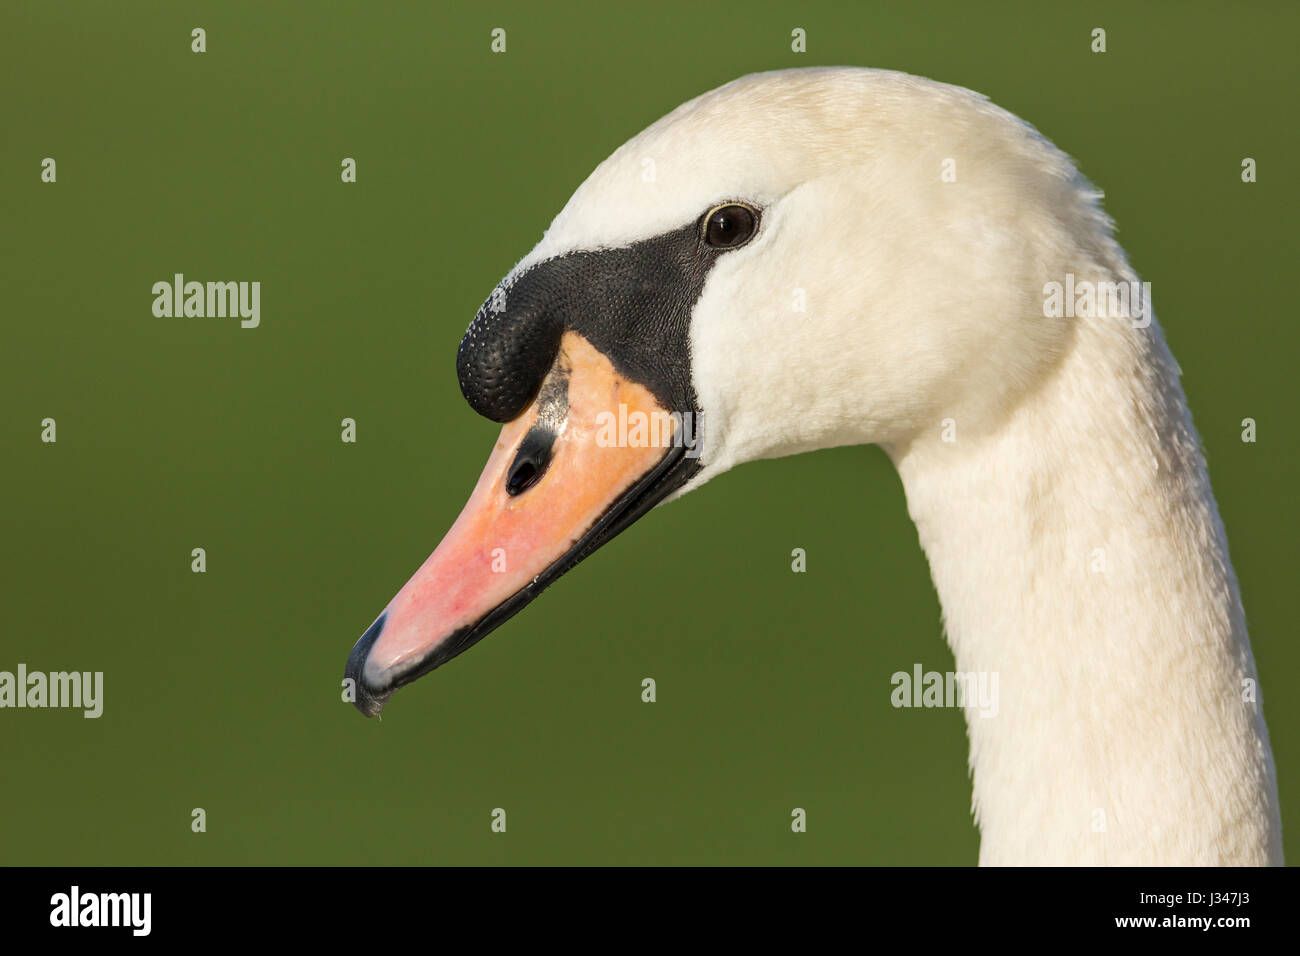 Close up of head portrait of Mute Swan Cygnus olor against green background Stock Photo